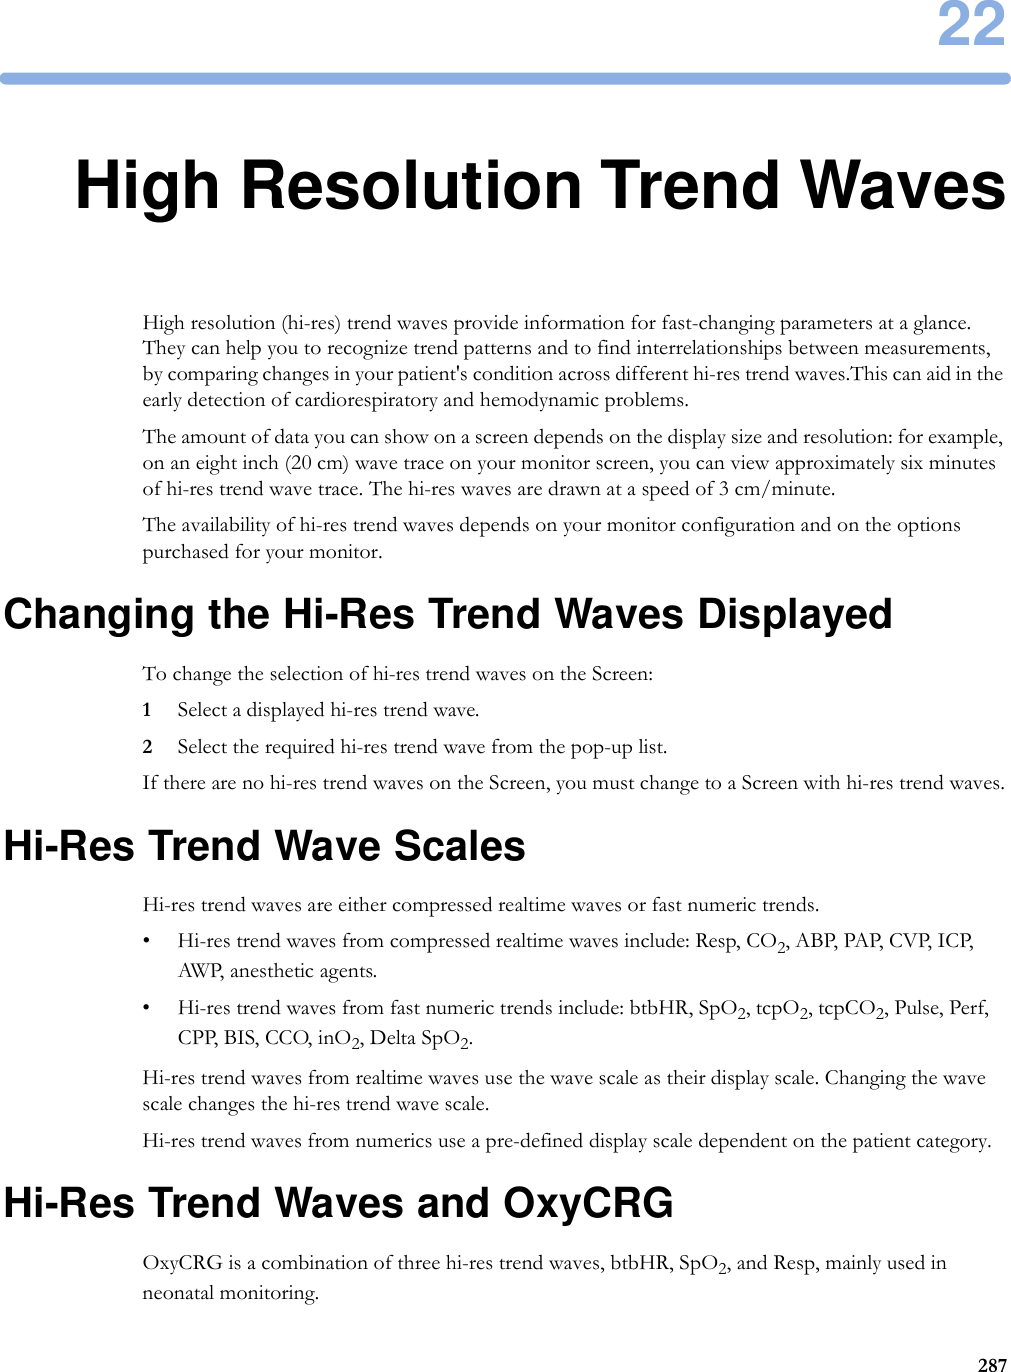 2228722High Resolution Trend WavesHigh resolution (hi-res) trend waves provide information for fast-changing parameters at a glance. They can help you to recognize trend patterns and to find interrelationships between measurements, by comparing changes in your patient&apos;s condition across different hi-res trend waves.This can aid in the early detection of cardiorespiratory and hemodynamic problems.The amount of data you can show on a screen depends on the display size and resolution: for example, on an eight inch (20 cm) wave trace on your monitor screen, you can view approximately six minutes of hi-res trend wave trace. The hi-res waves are drawn at a speed of 3 cm/minute.The availability of hi-res trend waves depends on your monitor configuration and on the options purchased for your monitor.Changing the Hi-Res Trend Waves DisplayedTo change the selection of hi-res trend waves on the Screen:1Select a displayed hi-res trend wave.2Select the required hi-res trend wave from the pop-up list.If there are no hi-res trend waves on the Screen, you must change to a Screen with hi-res trend waves.Hi-Res Trend Wave ScalesHi-res trend waves are either compressed realtime waves or fast numeric trends.• Hi-res trend waves from compressed realtime waves include: Resp, CO2, A BP,  PAP, CV P, ICP, AWP, anesthetic agents.• Hi-res trend waves from fast numeric trends include: btbHR, SpO2, tcpO2, tcpCO2, Pulse, Perf, CPP, BIS, CCO, inO2, Delta SpO2.Hi-res trend waves from realtime waves use the wave scale as their display scale. Changing the wave scale changes the hi-res trend wave scale.Hi-res trend waves from numerics use a pre-defined display scale dependent on the patient category.Hi-Res Trend Waves and OxyCRGOxyCRG is a combination of three hi-res trend waves, btbHR, SpO2, and Resp, mainly used in neonatal monitoring.